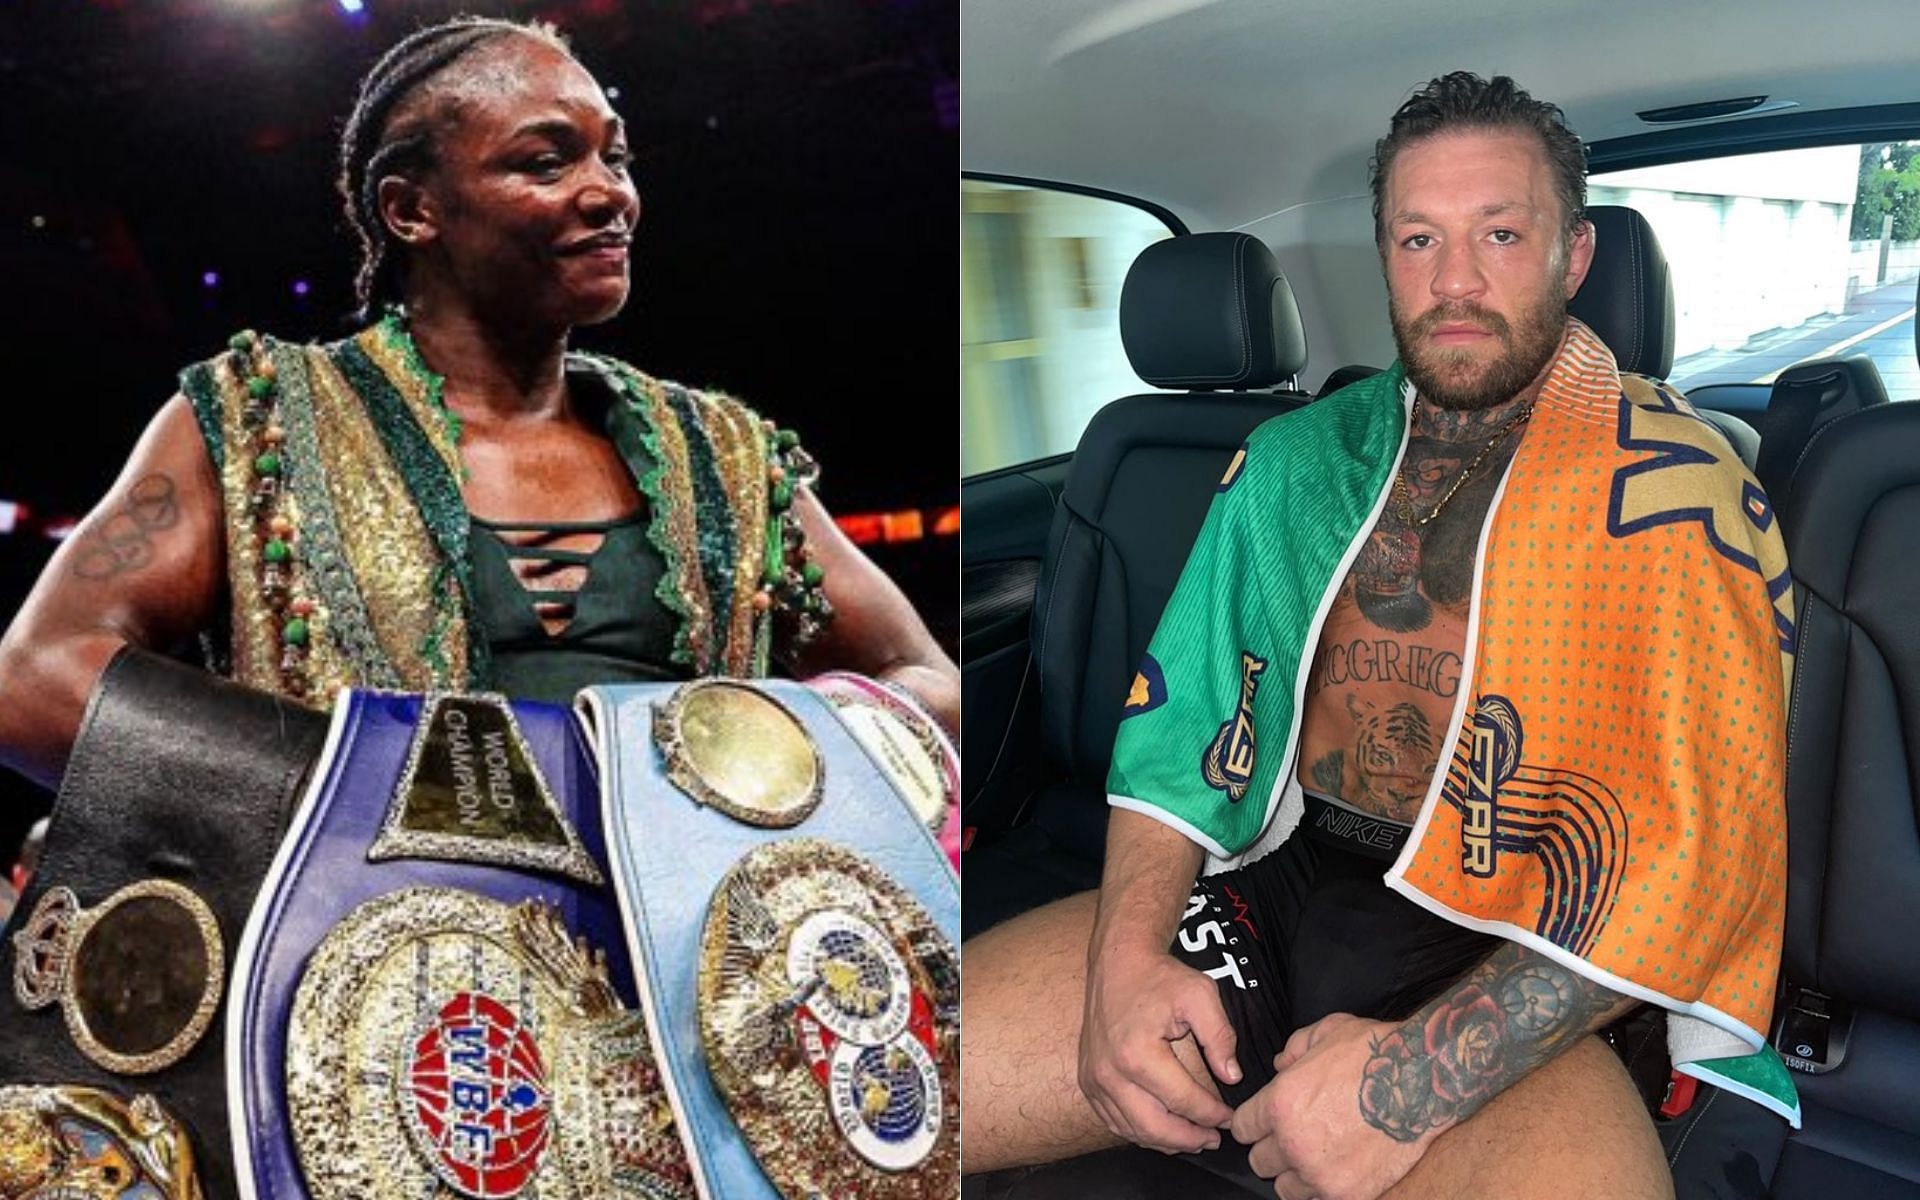 Claressa Shields has compared her potential fight with Savannah Marshall to Conor McGregor